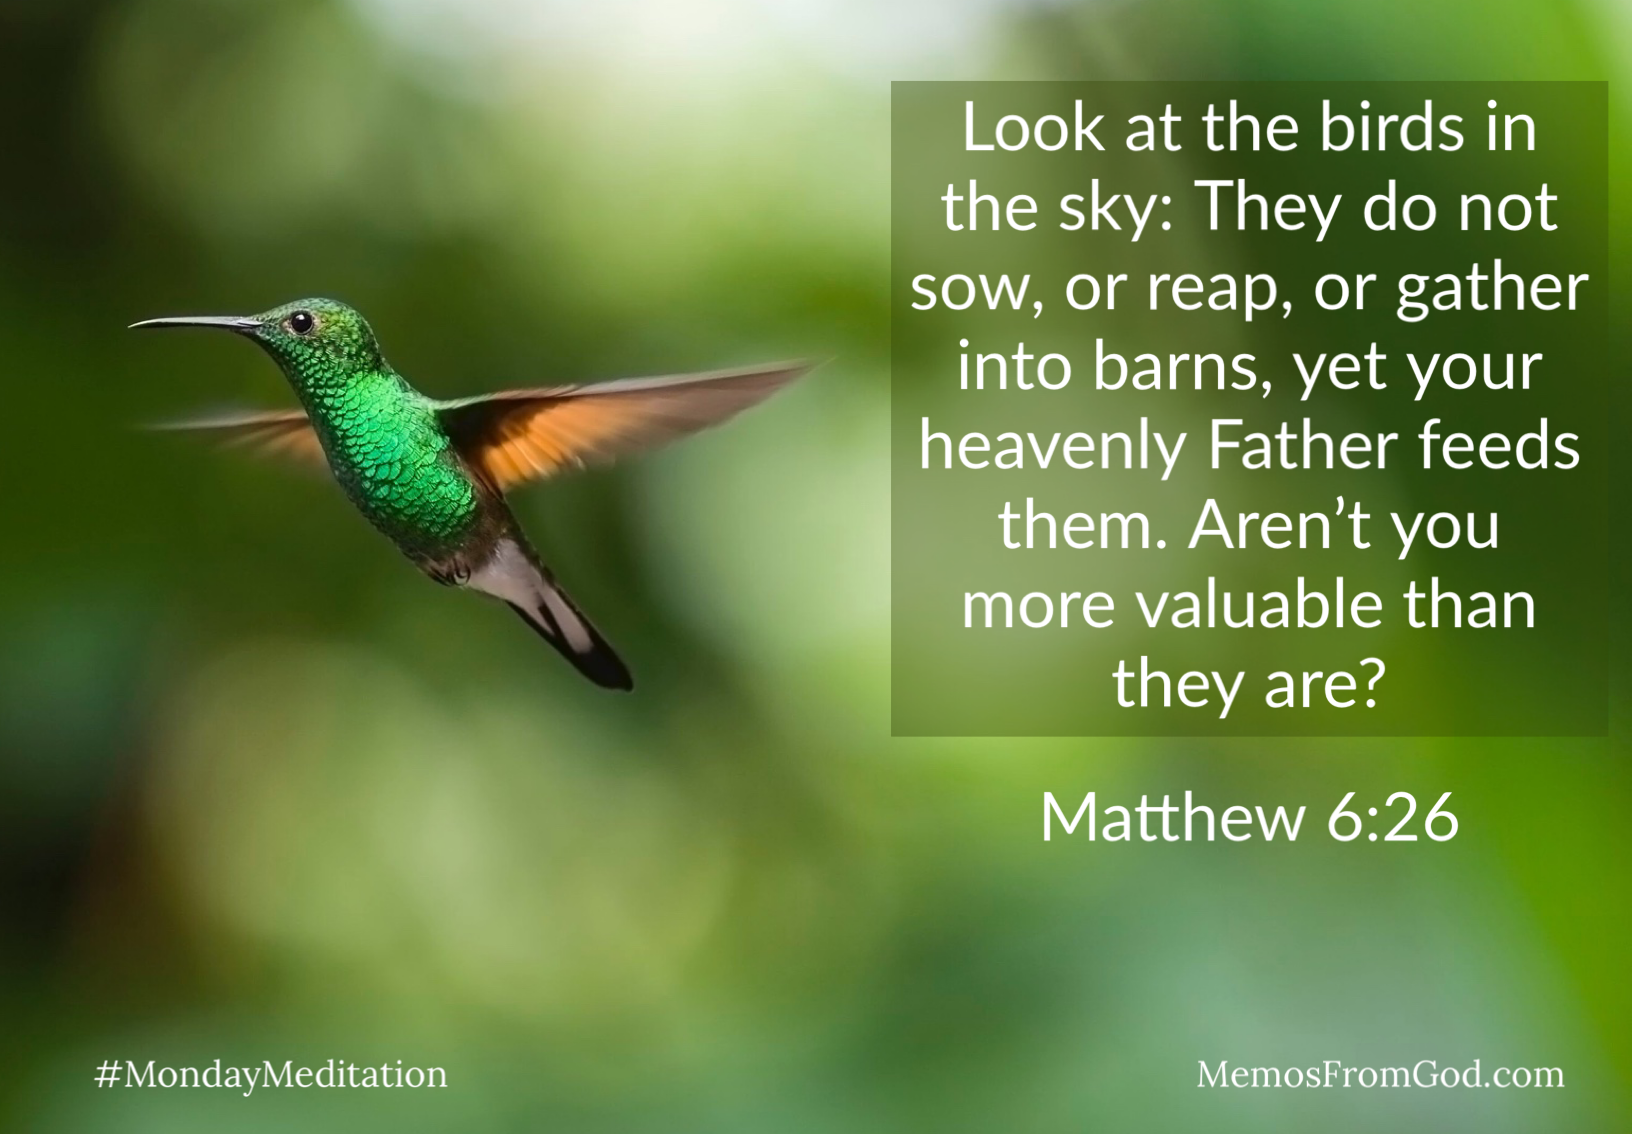 An emerald green hummingbird hovering in front of a bokeh green background. Caption: Look at the birds in the sky: They do not sow, or reap, or gather into barns, yet your heavenly Father feeds them. Aren't you more valuable than they are? Matthew 6:26